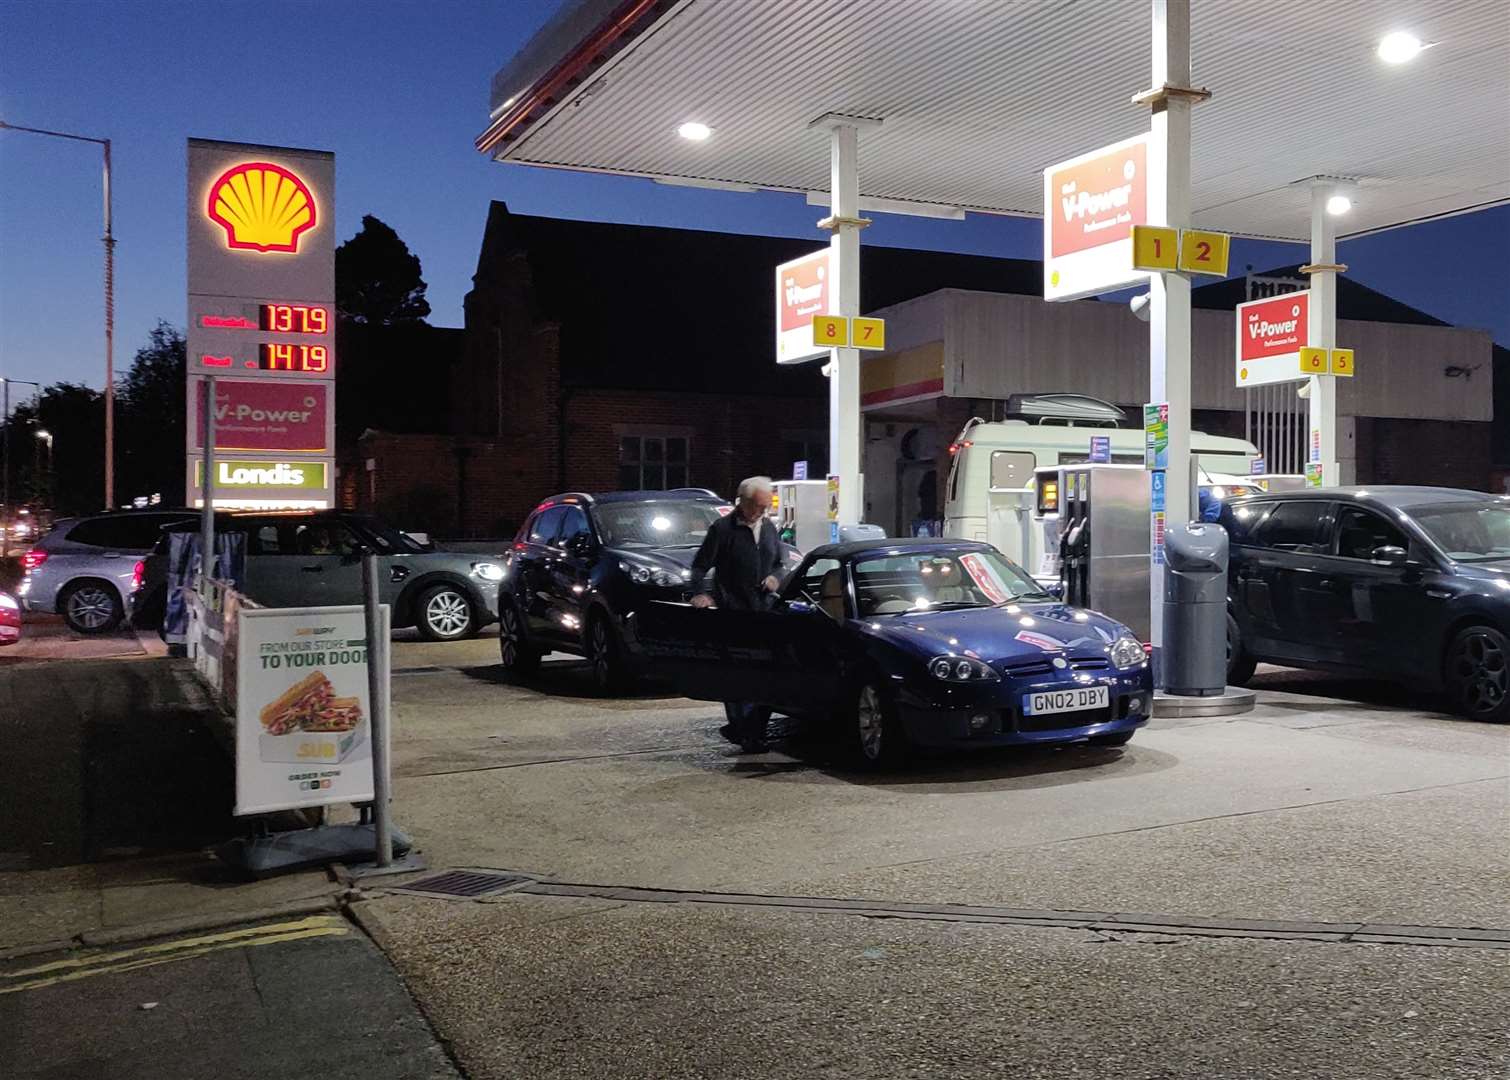 Vehicles continue to form lengthy queues to access petrol station forecourts.